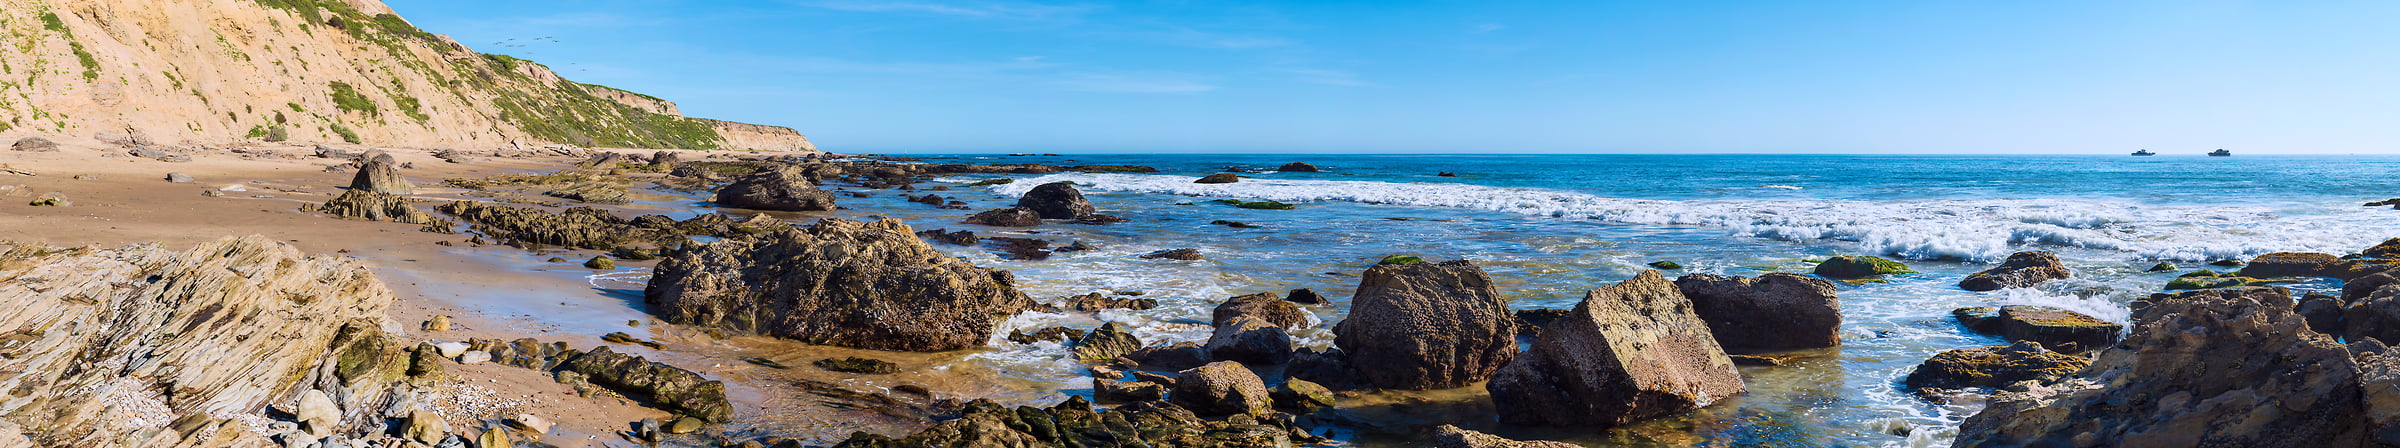 1,405 megapixels! A very high resolution, large-format VAST photo of a seascape with the beach, rocks, sand, and waves; panorama photograph created by Jim Tarpo in Newport Beach, California